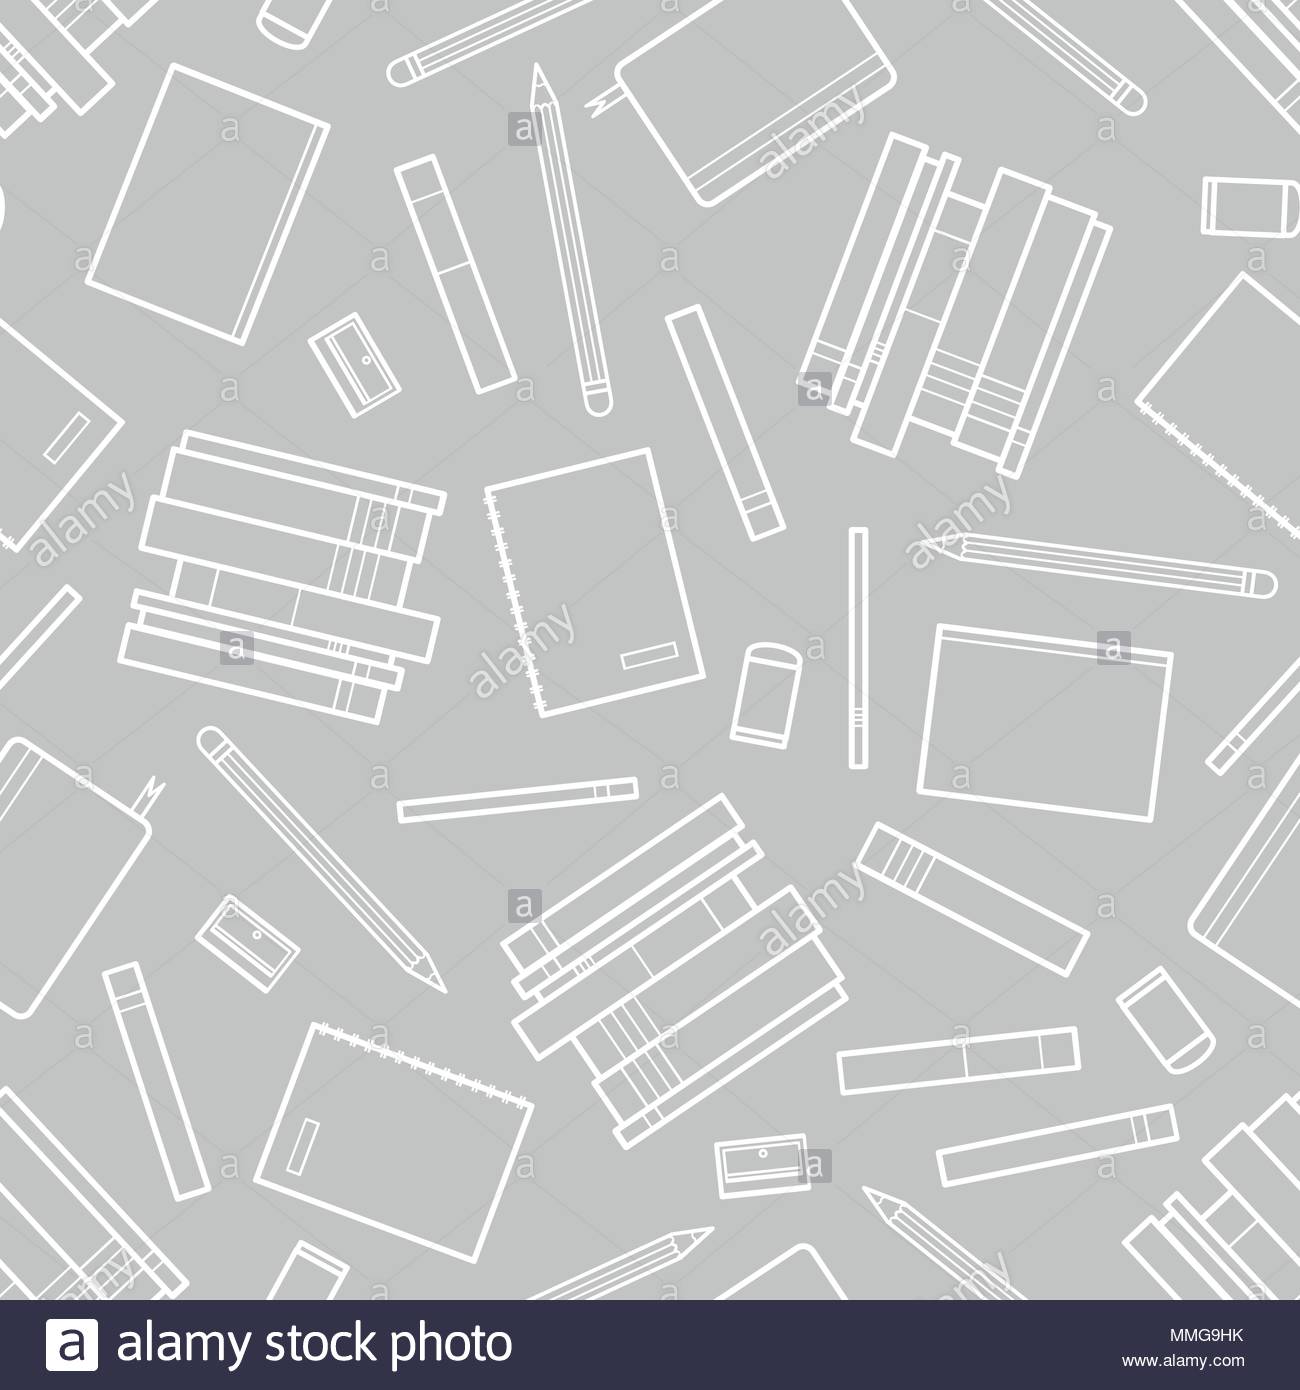 Cute White Outline Books And Stationery Random On Light Gray